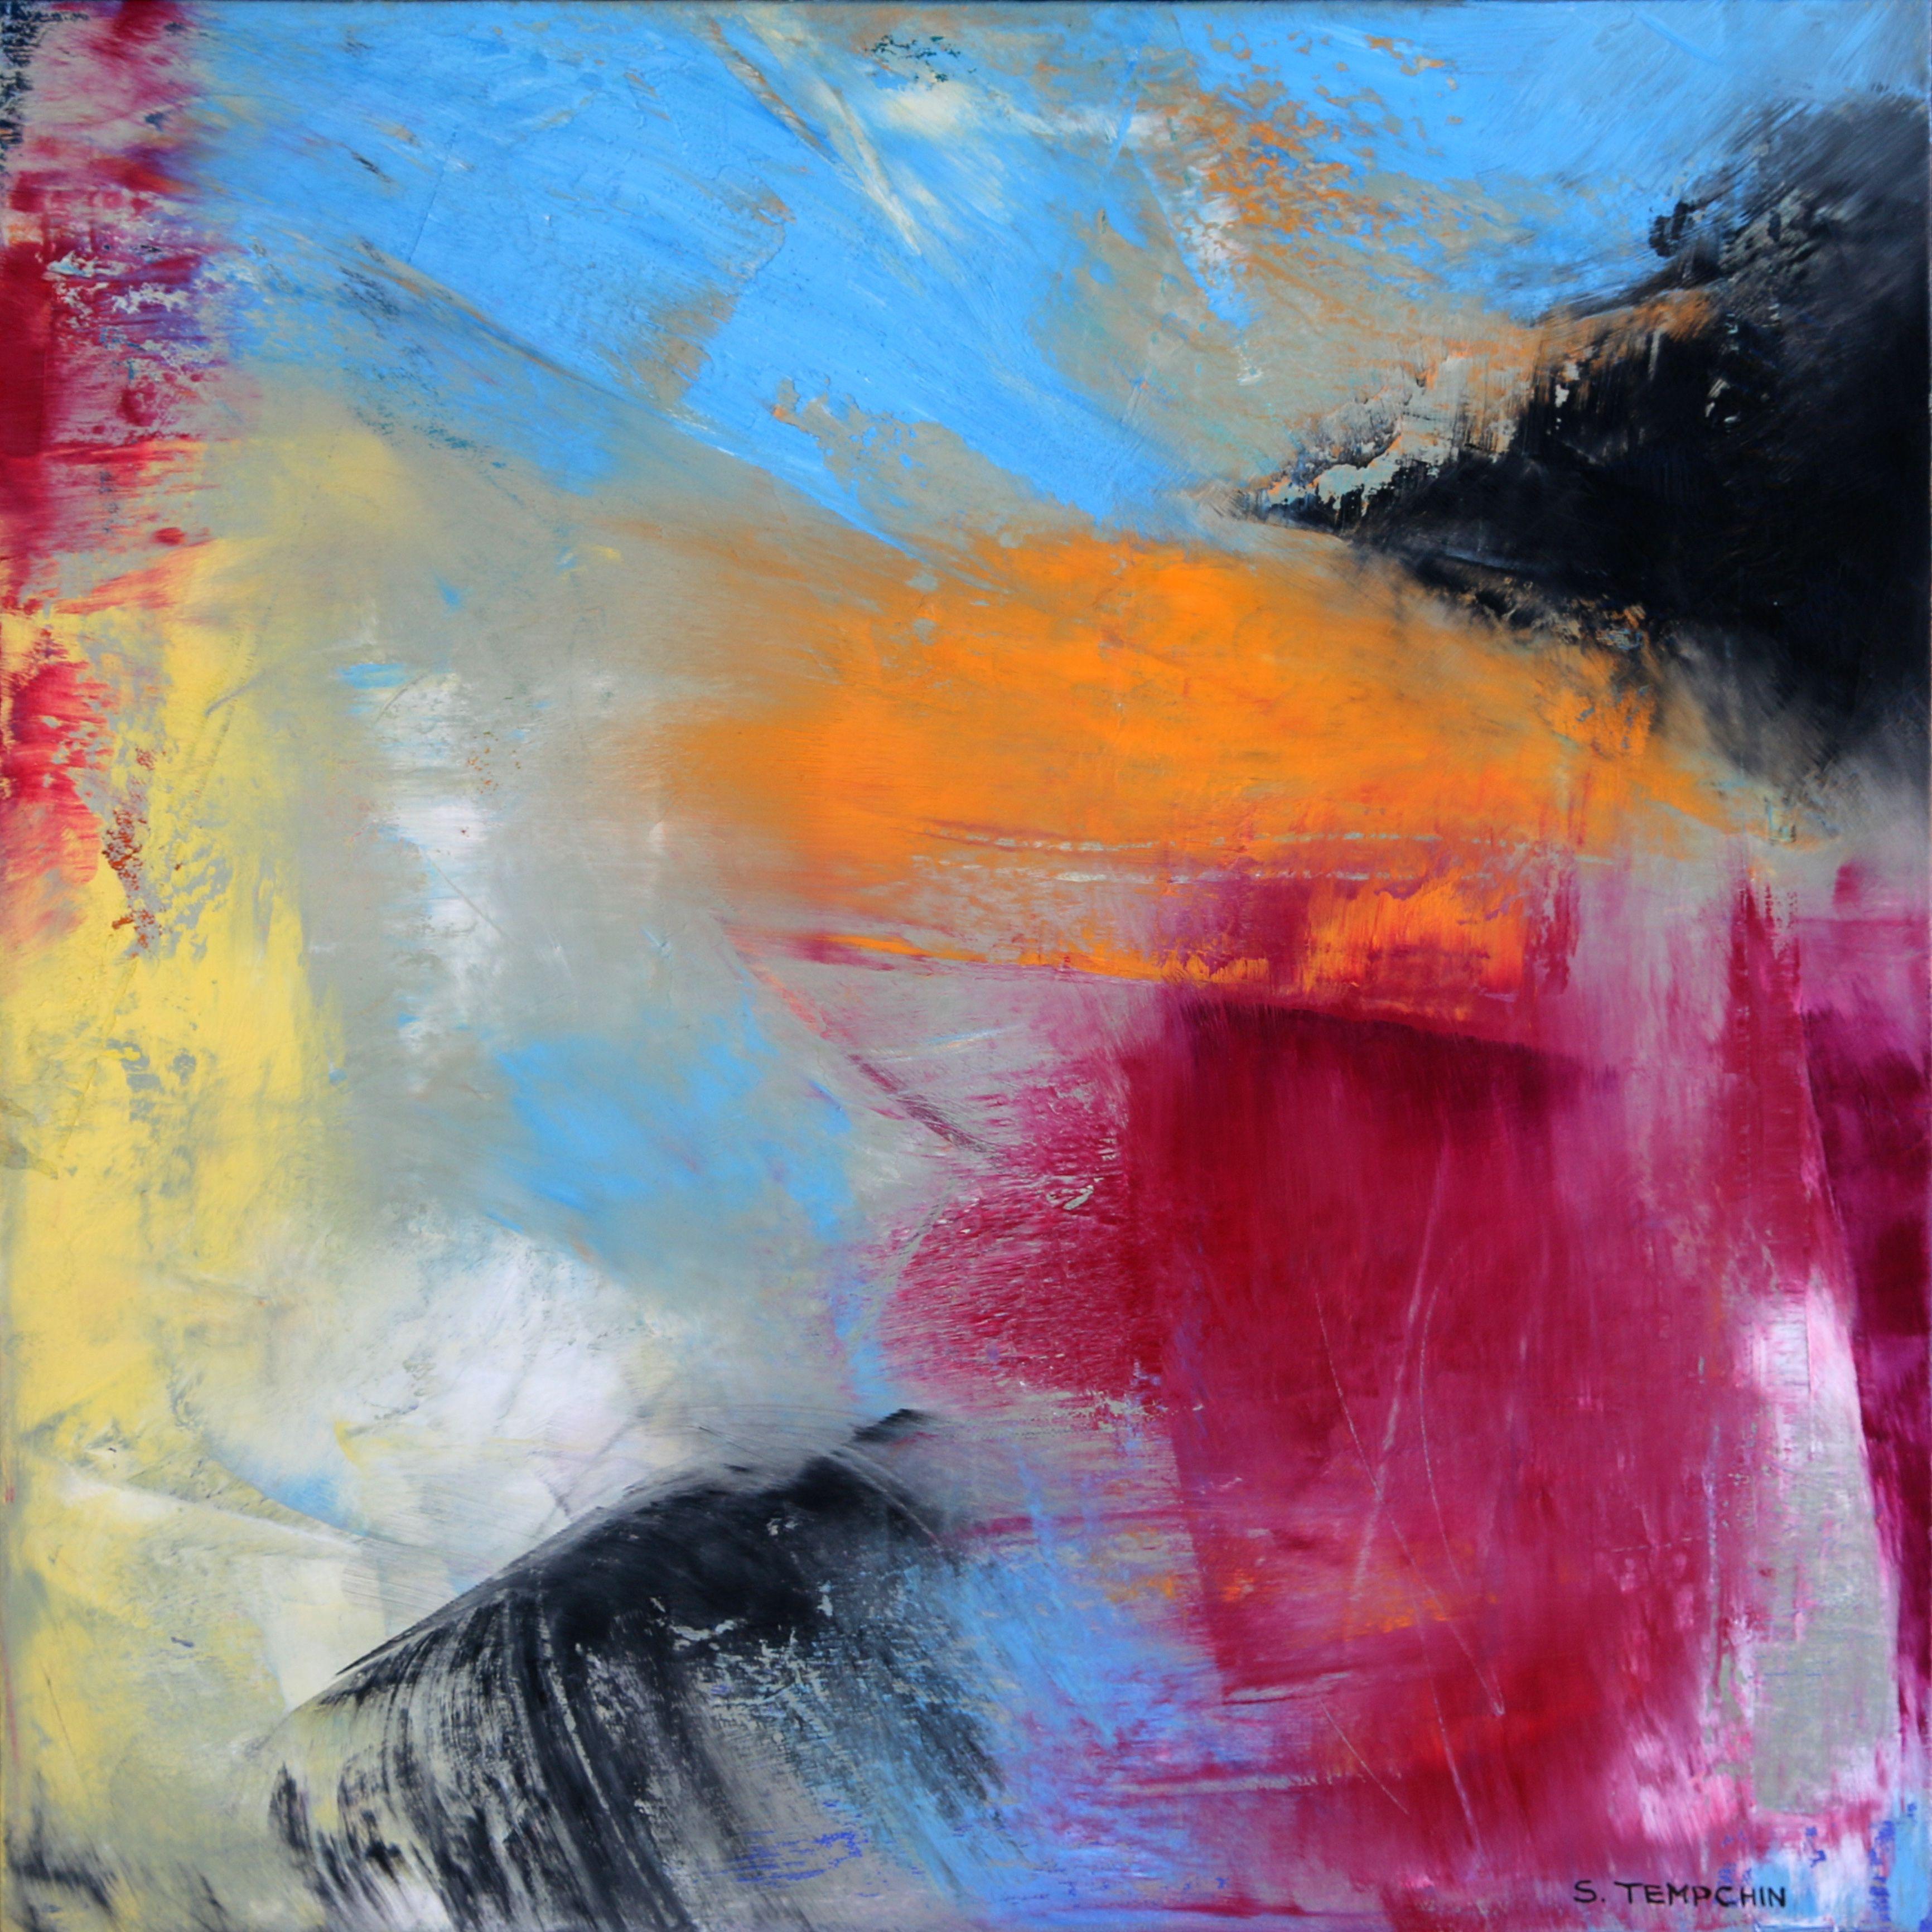 Sheryl Tempchin Abstract Painting - Here We Go, Painting, Oil on Canvas